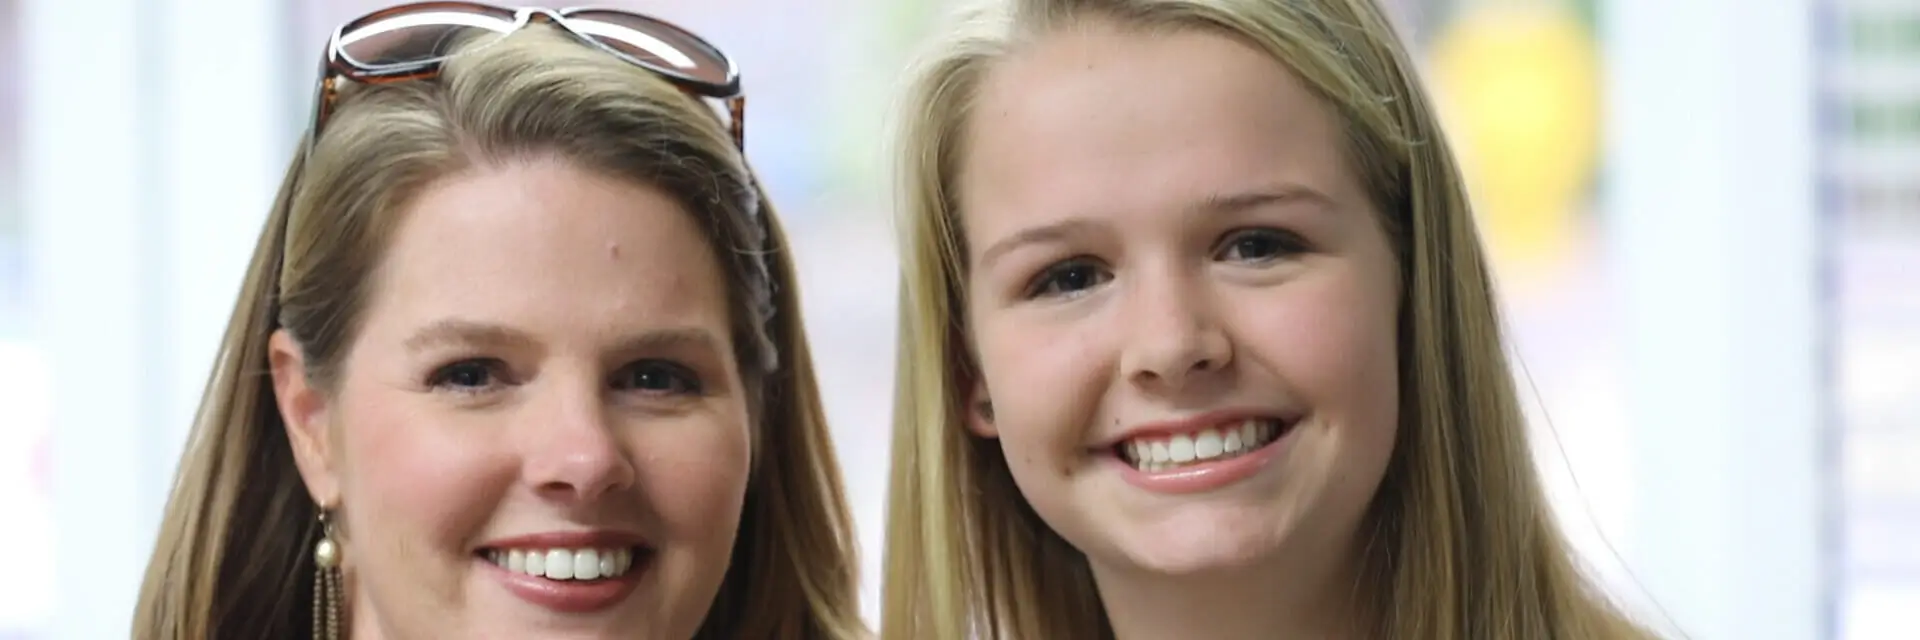 Backus Smiles, Backus Home Slider - Happy mother and daughter